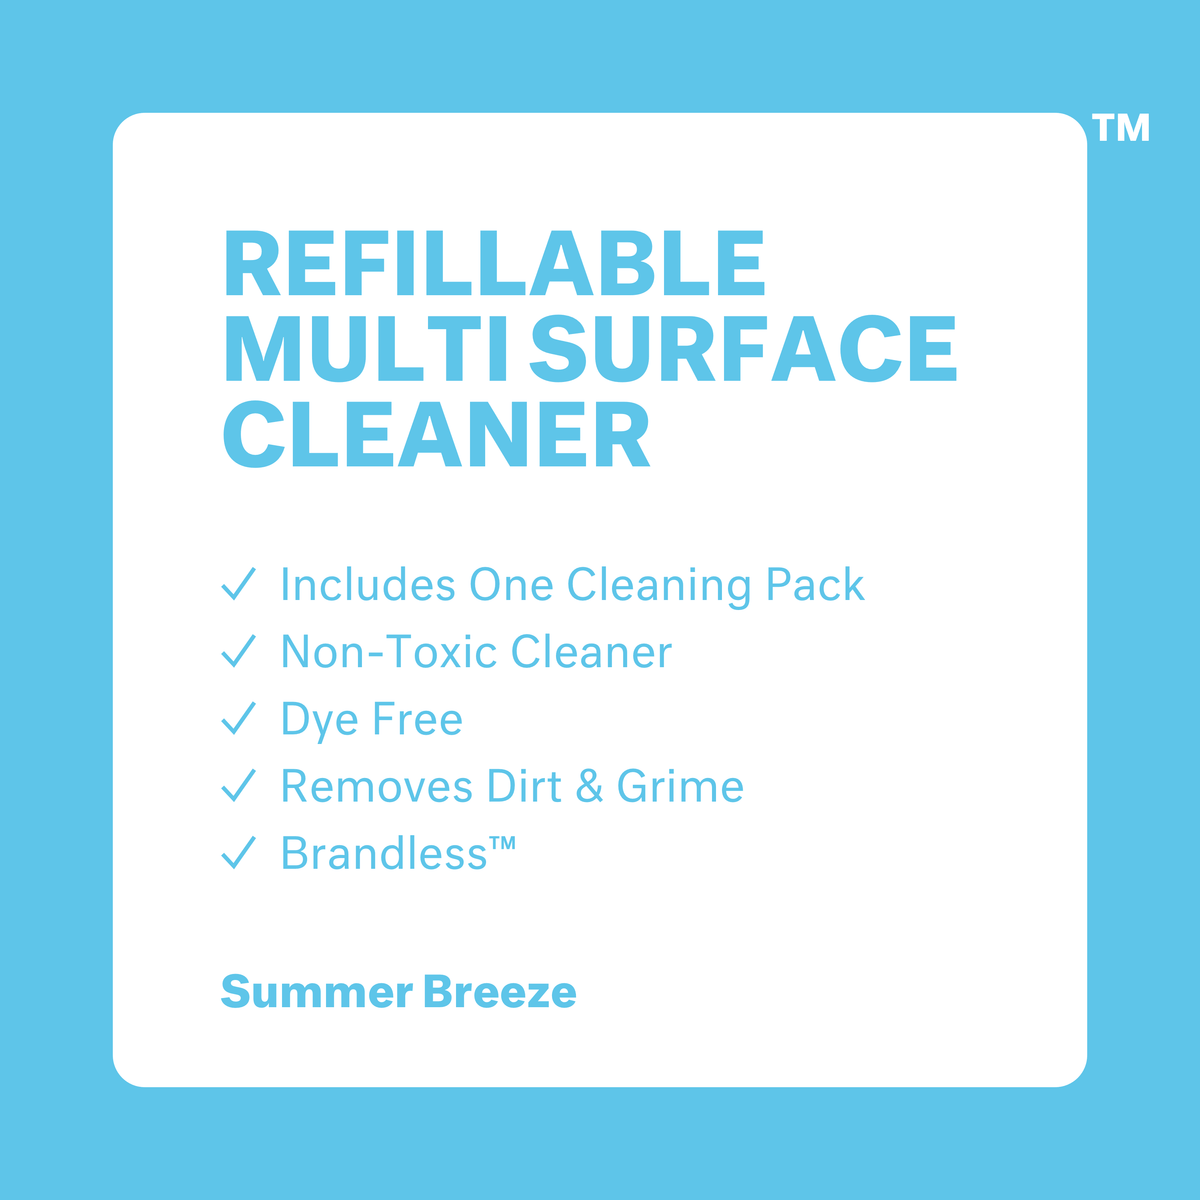 Refillable Multi Surface Cleaner.  Includes one cleaning pack. Non-toxic cleaner. Dye free. Removes dirt and grime. Brandless. Summer Breeze.